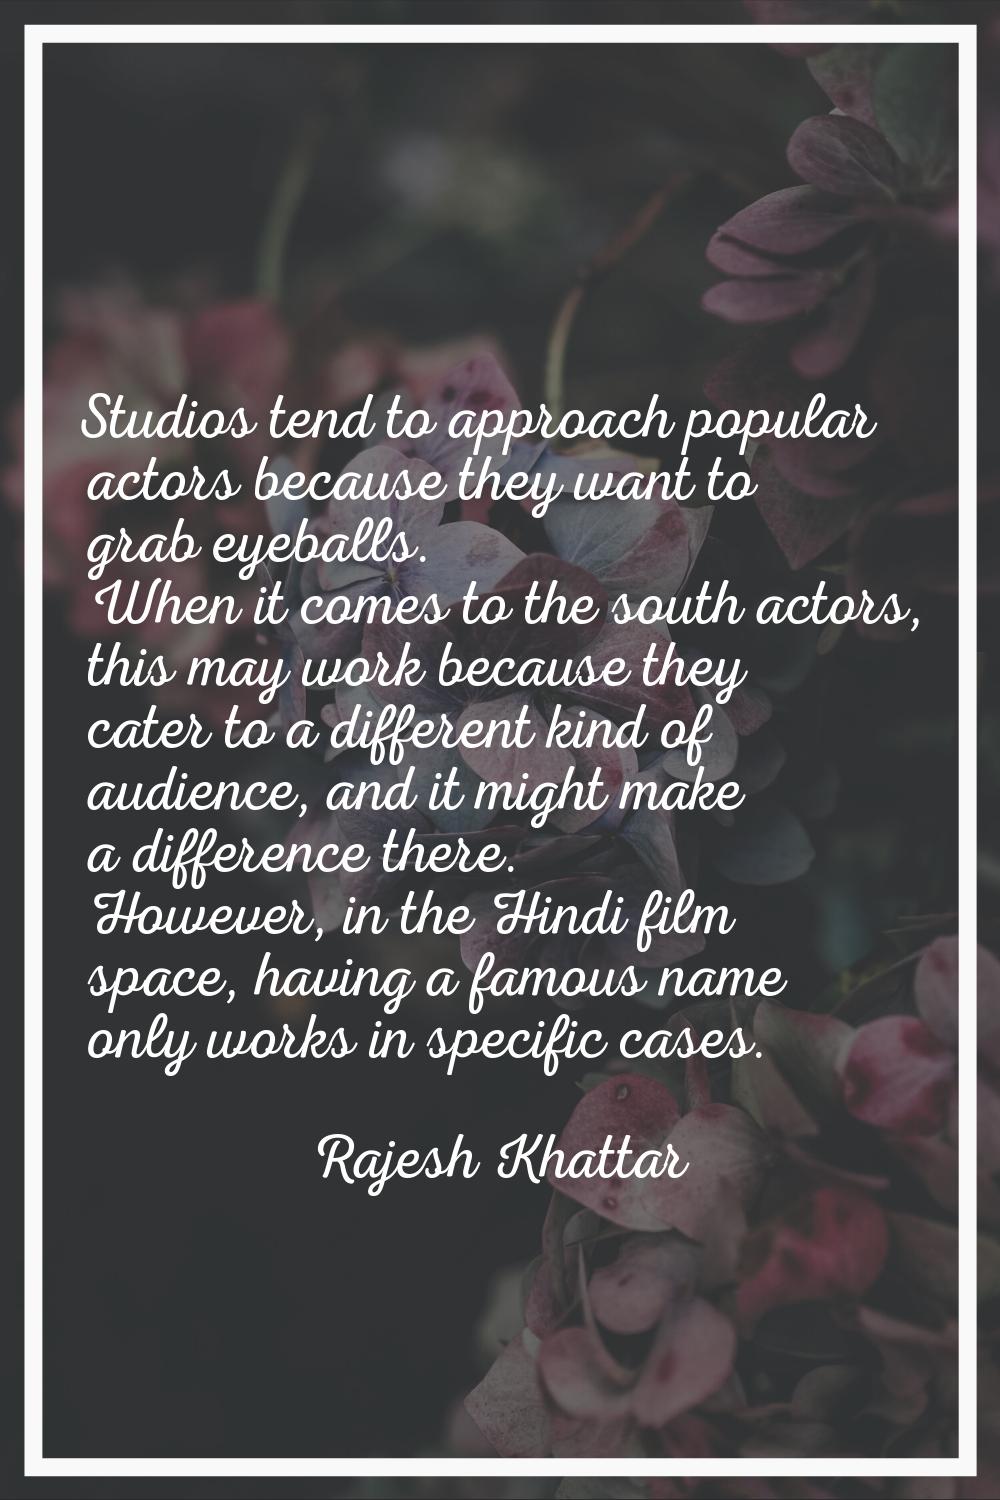 Studios tend to approach popular actors because they want to grab eyeballs. When it comes to the so